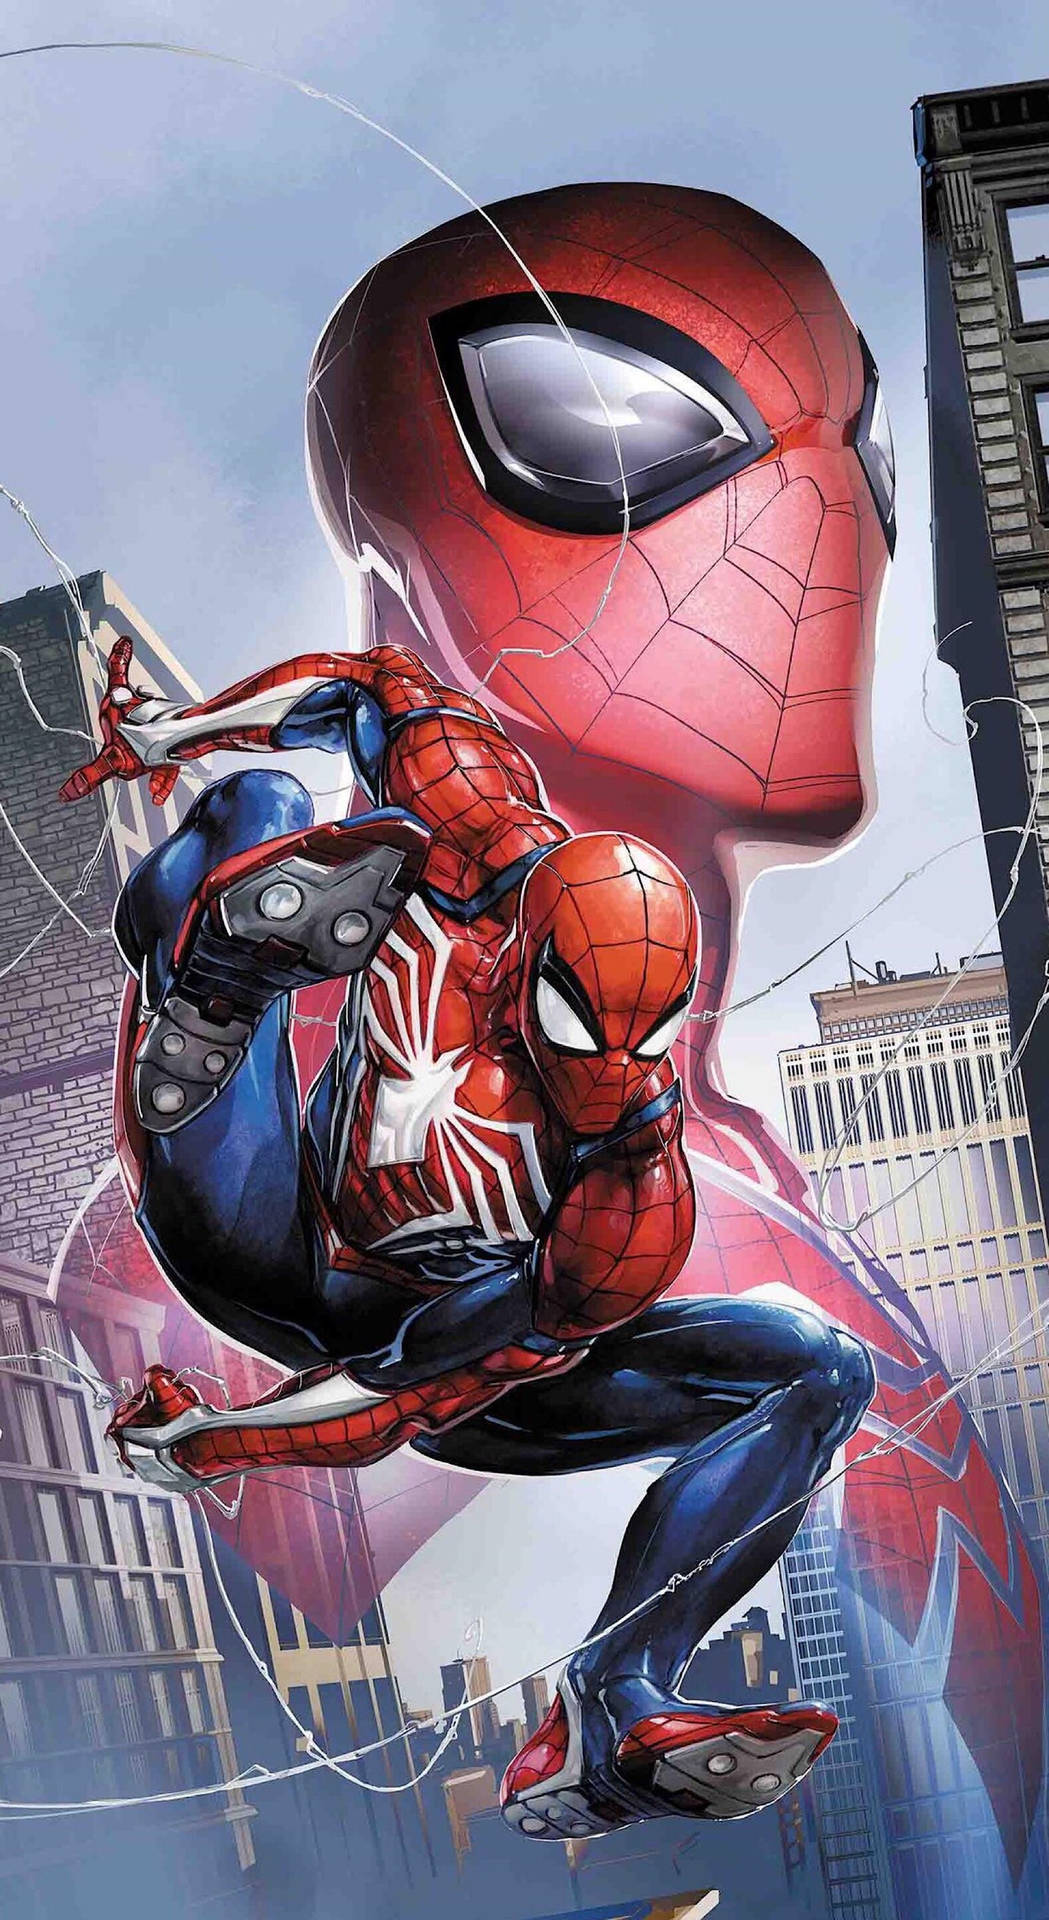 Experience unlimited potential with the Marvel 4K Phone Wallpaper